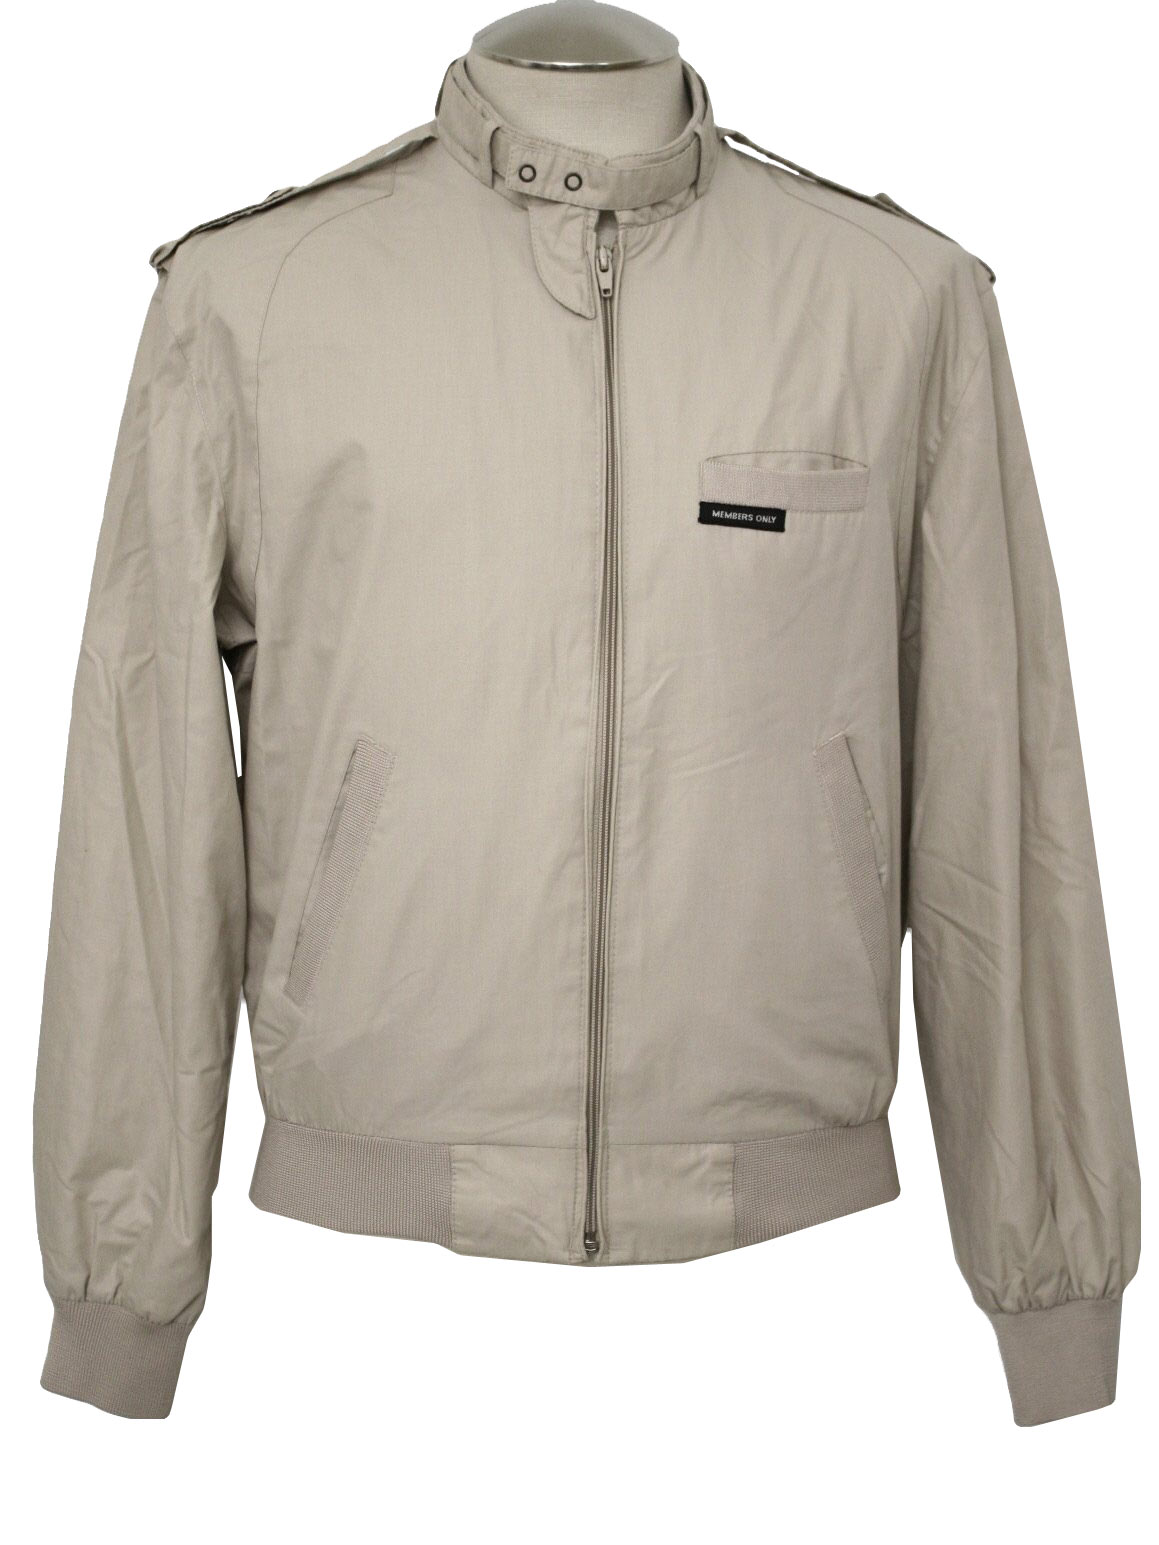 Retro 1980's Jacket (Members Only) : 80s -Members Only- Mens light tan ...